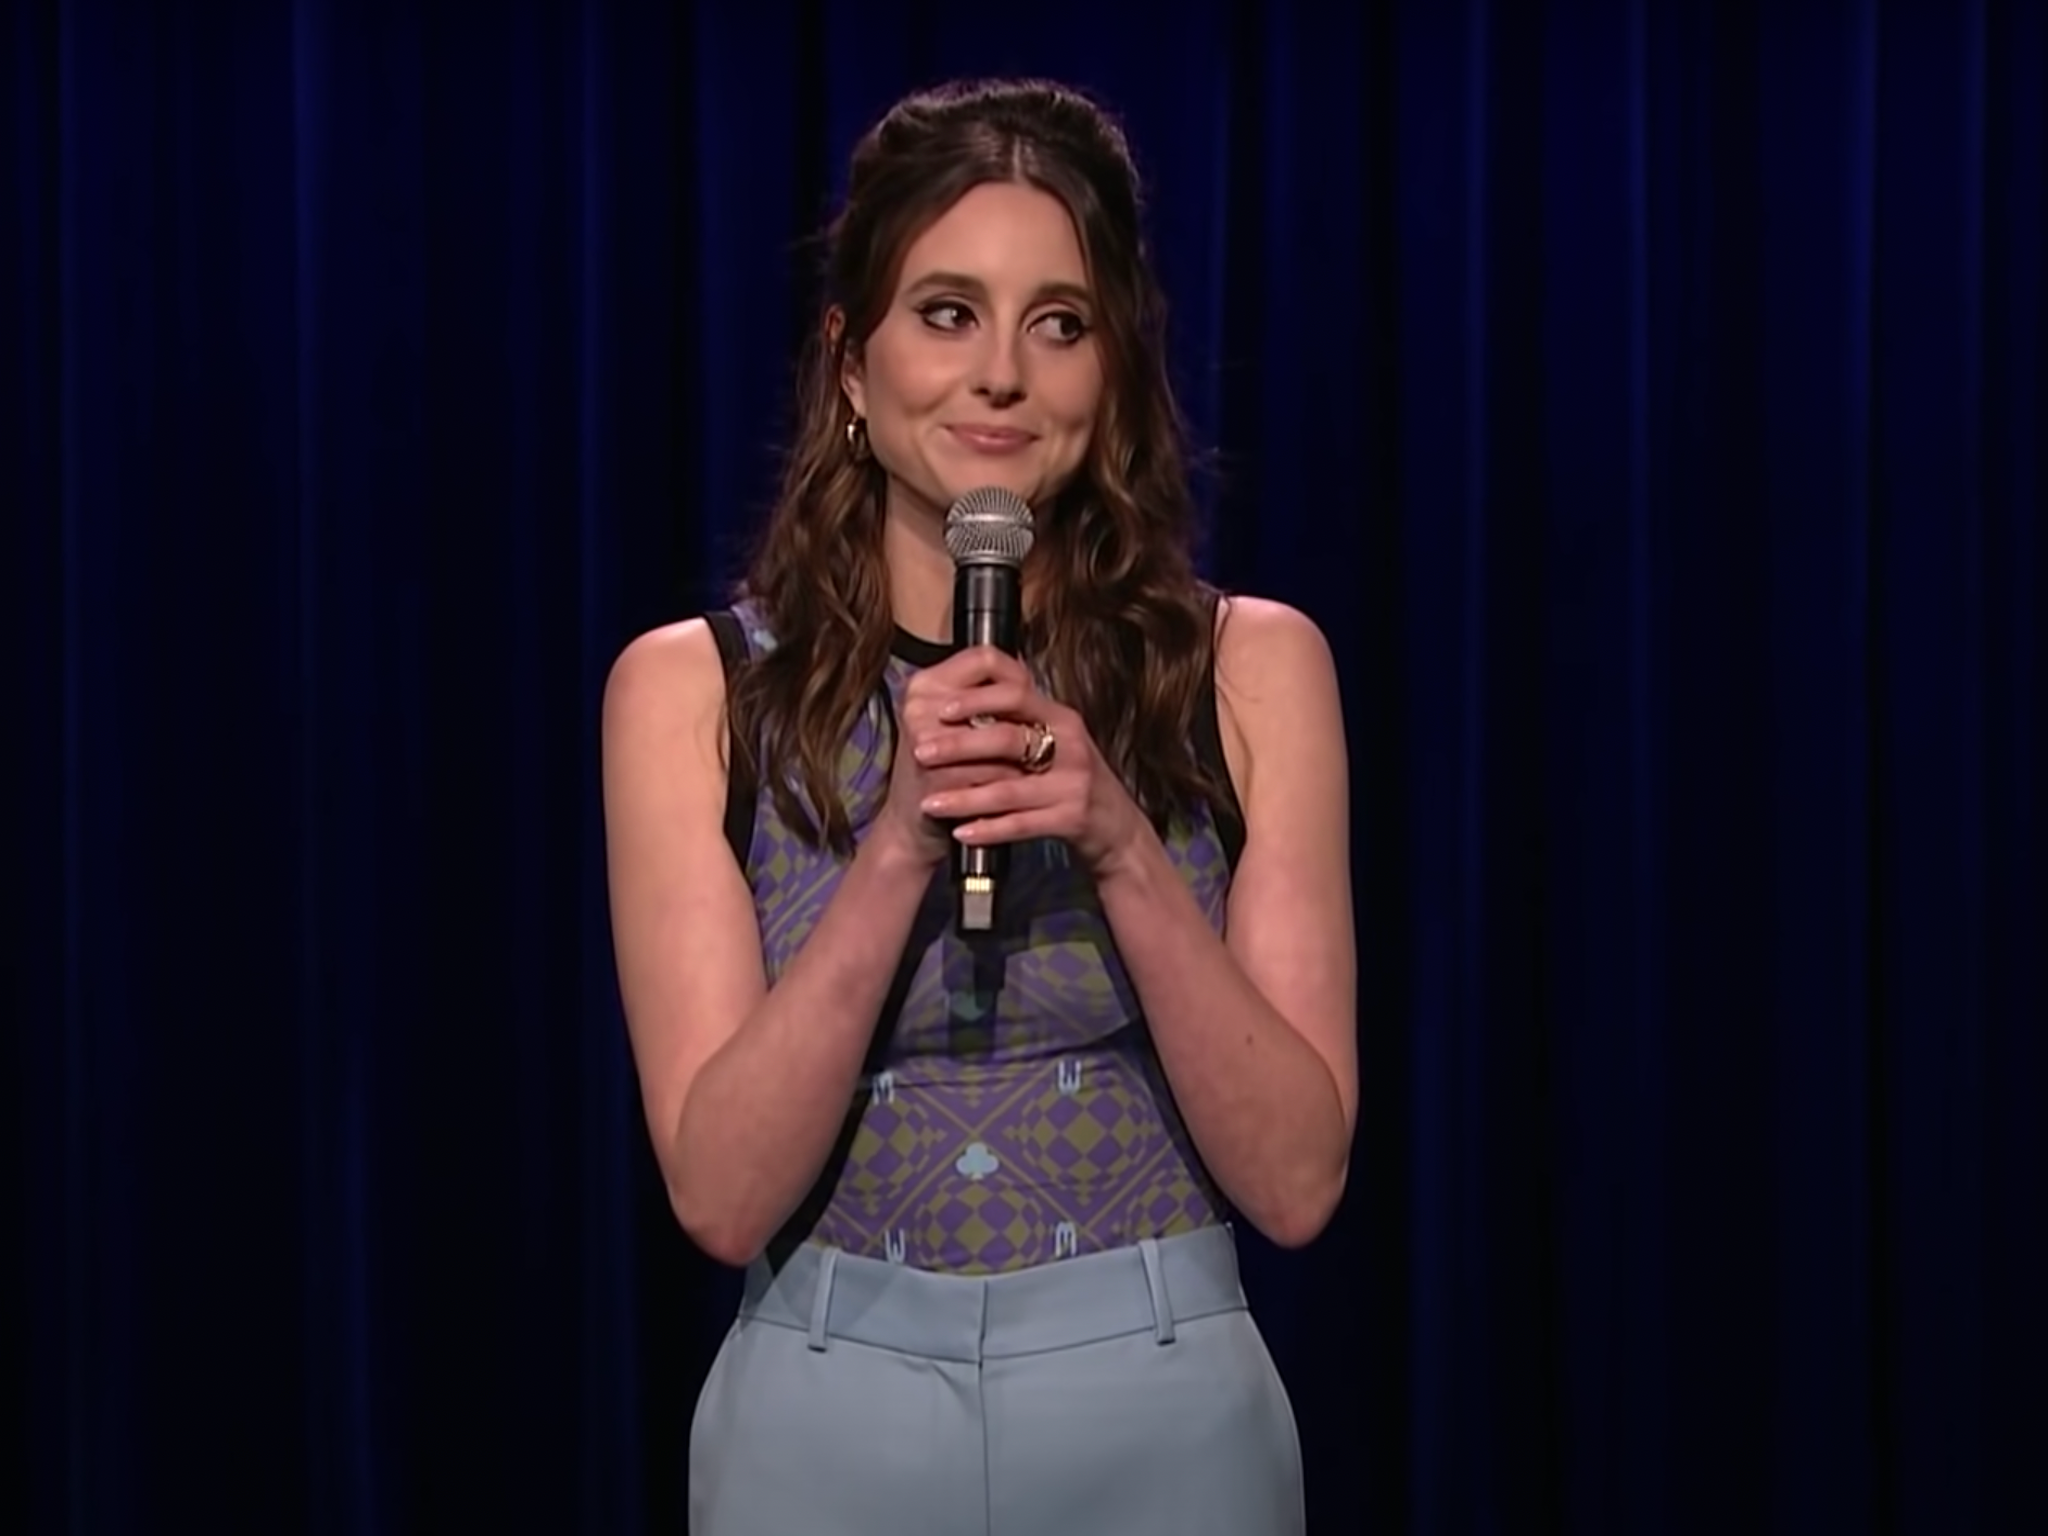 Mary Beth Barone scored her latest big-time gig on ‘The Tonight Show Starring Jimmy Fallon’